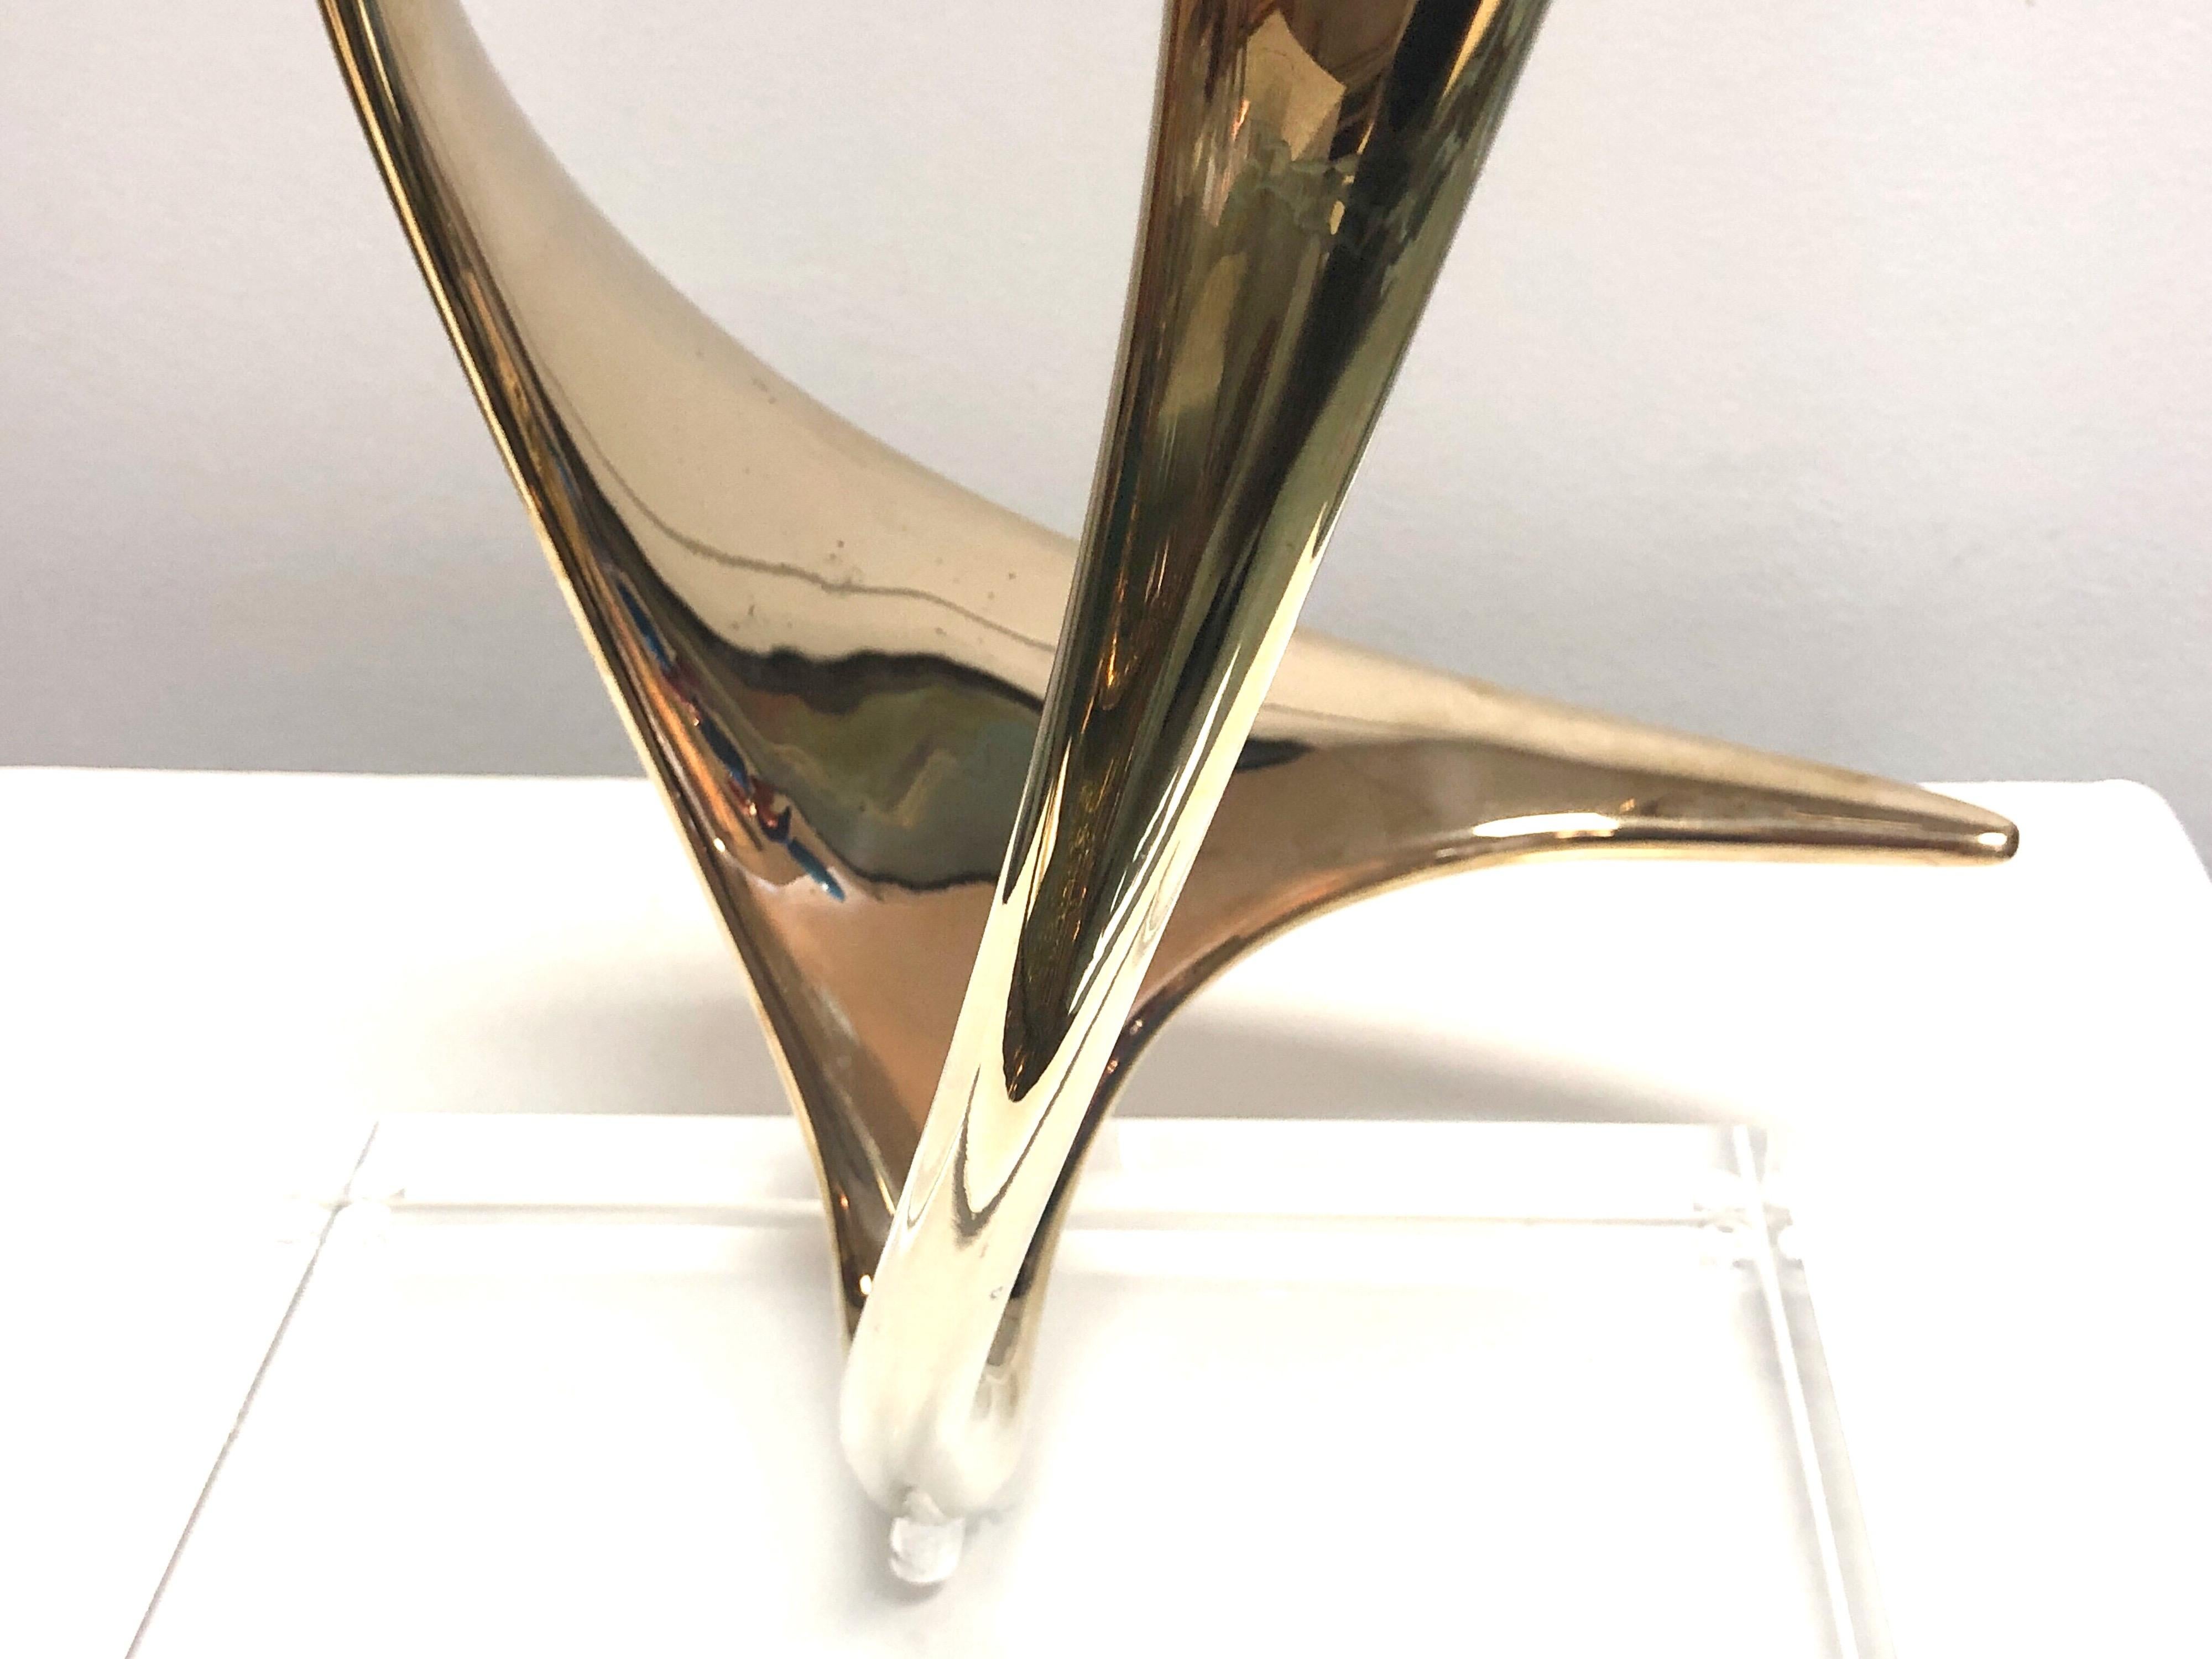 Lou Pearson and Robbie Robins Abstract Bronze Sculpture on Lucite Base 1